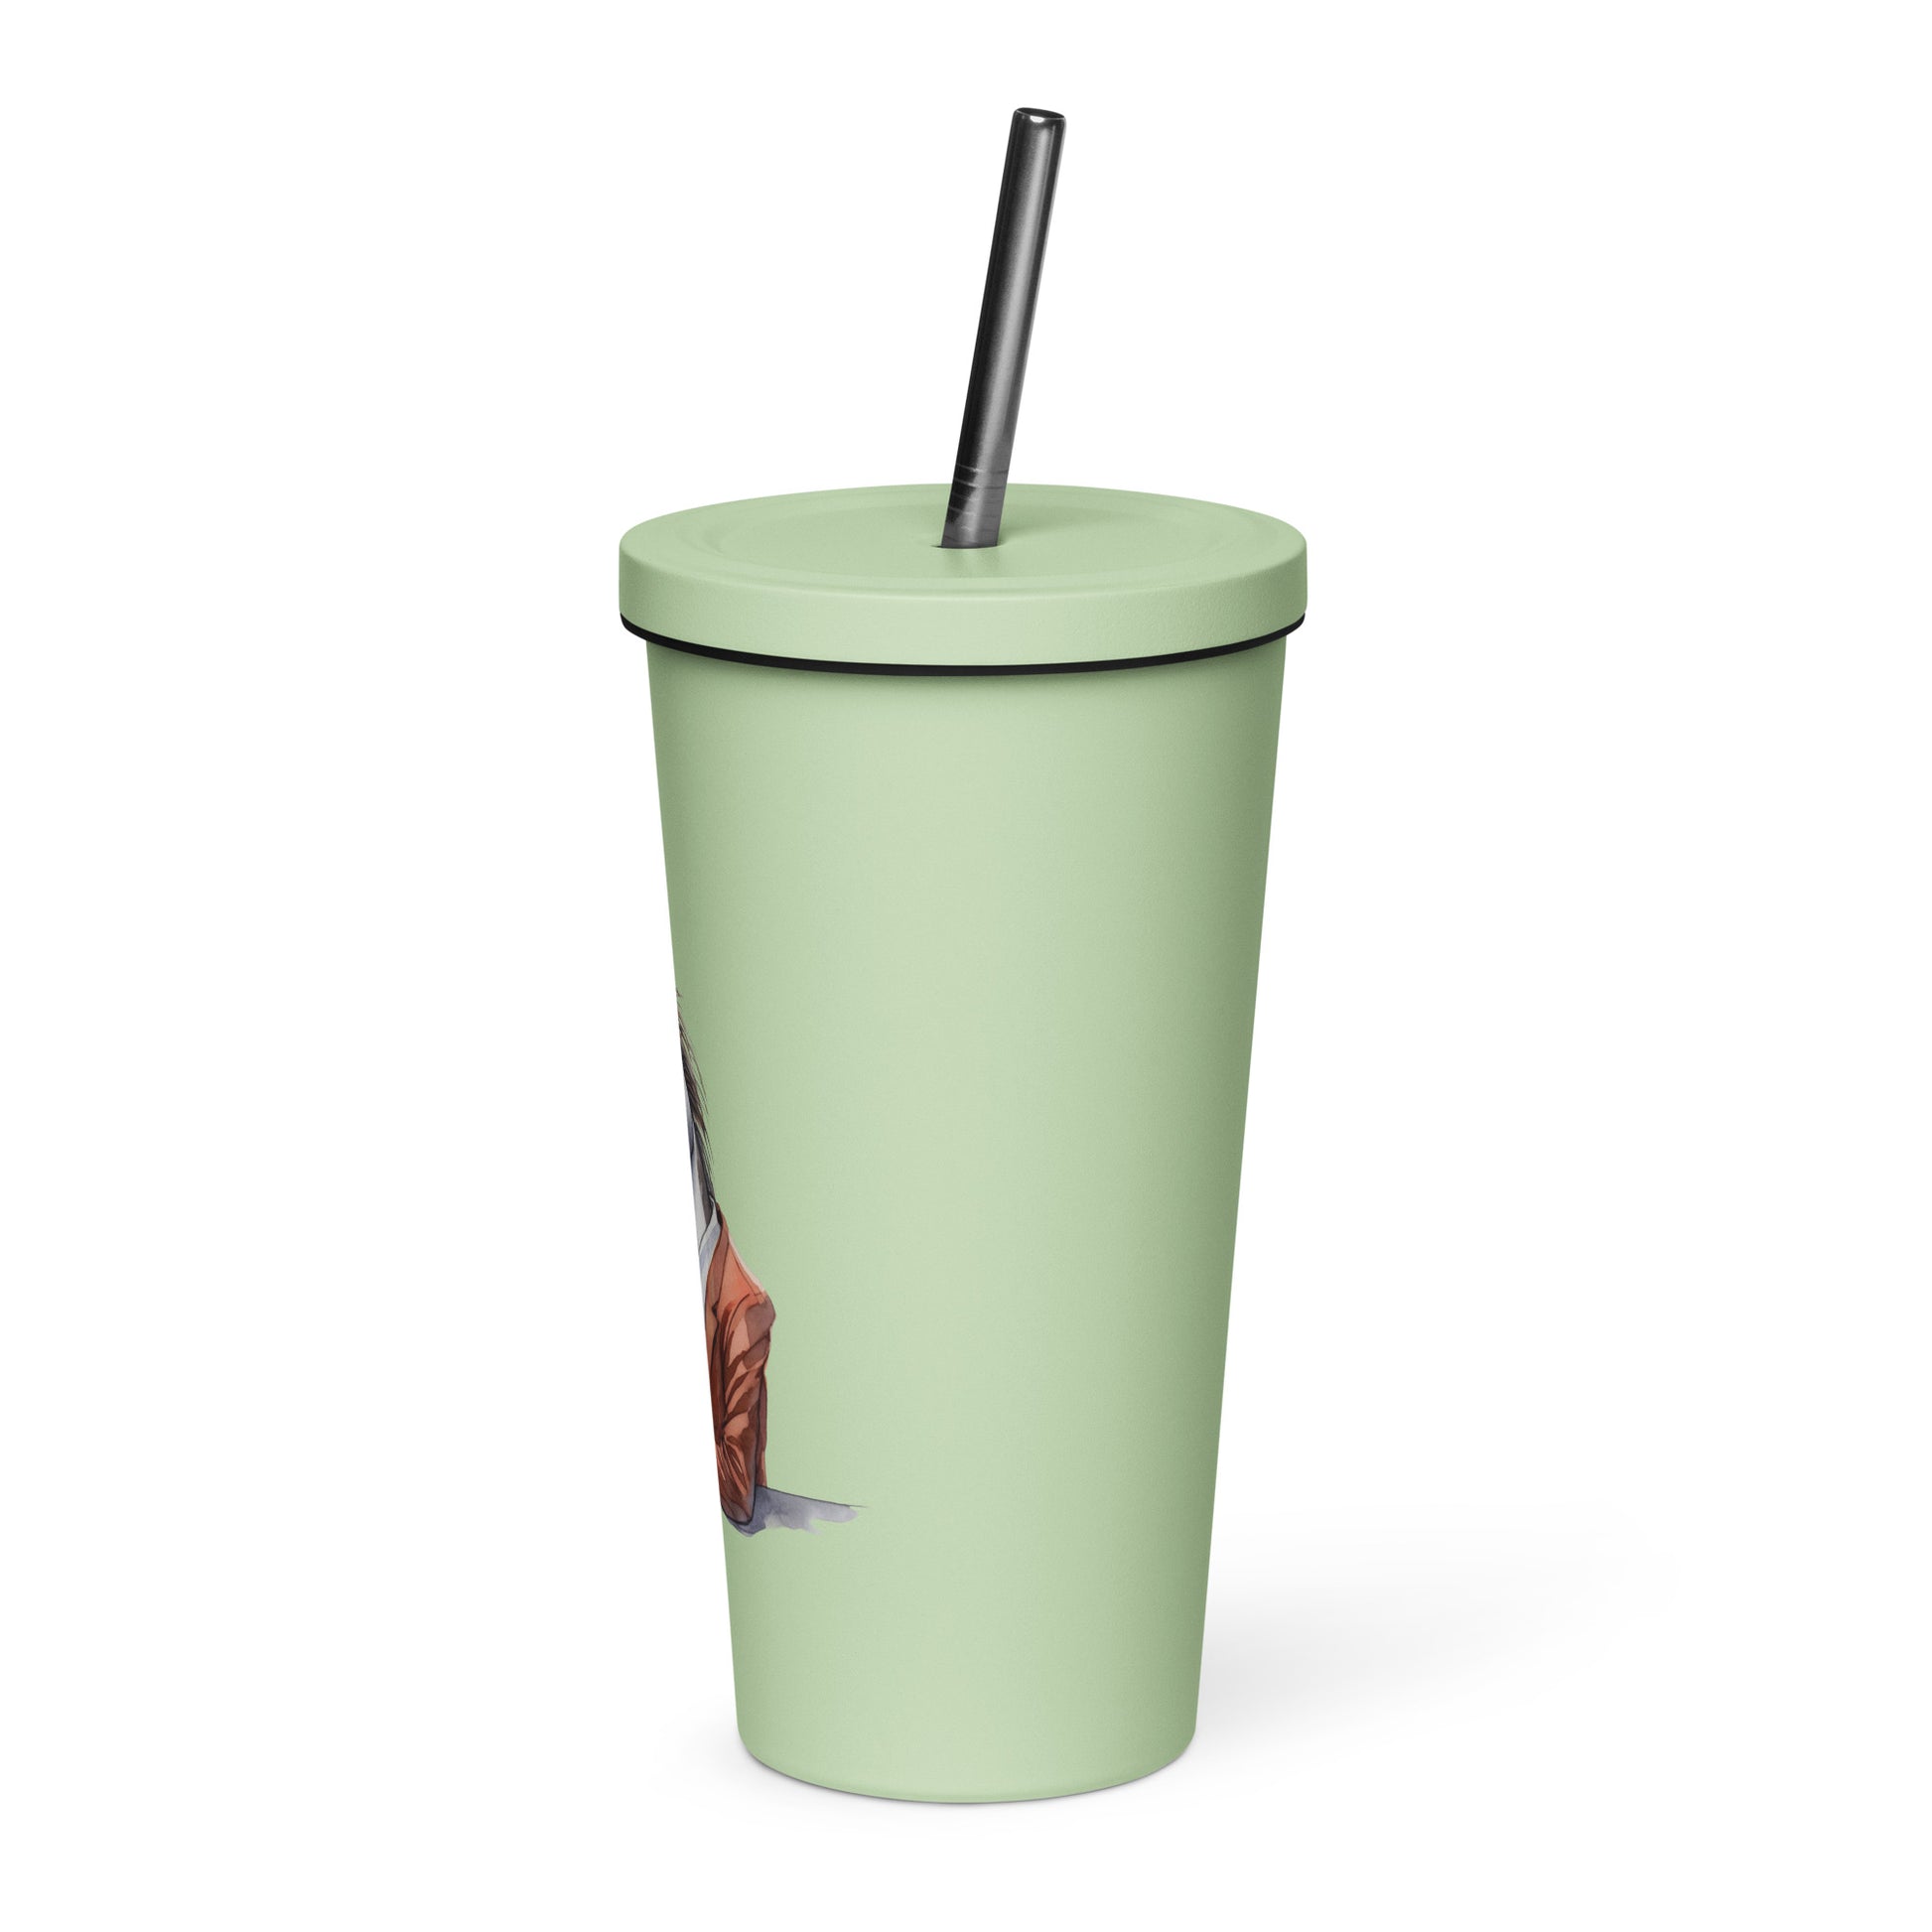 Insulated tumbler with a straw- Crazy Horse 13 - offthespeed